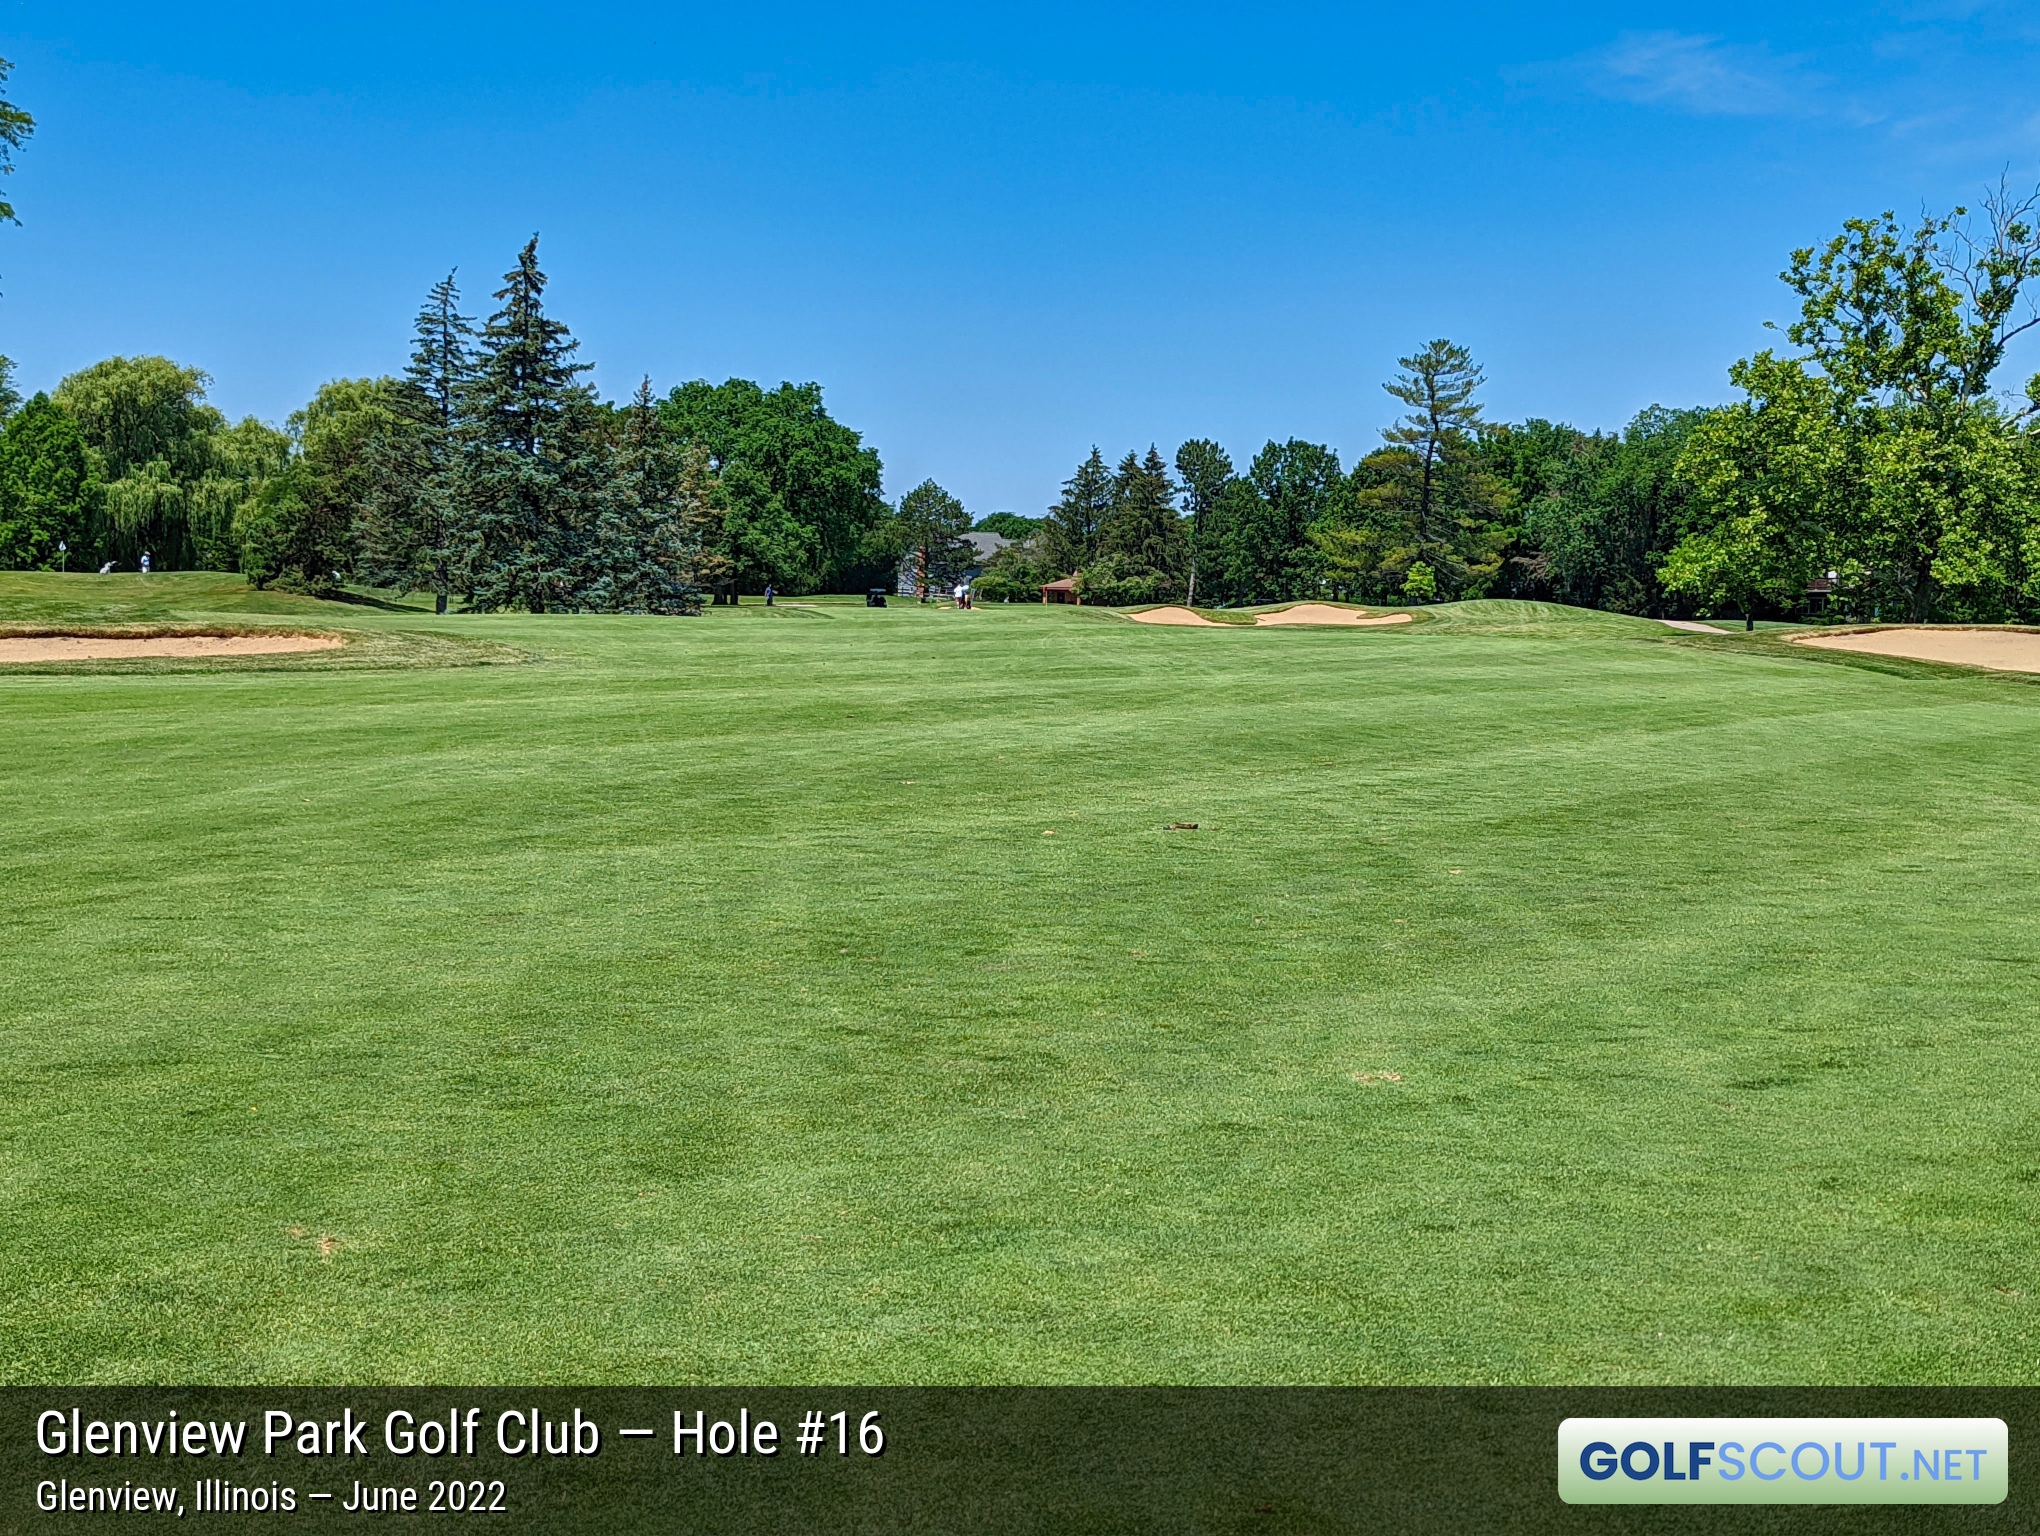 Photo of hole #16 at Glenview Park Golf Club in Glenview, Illinois. 